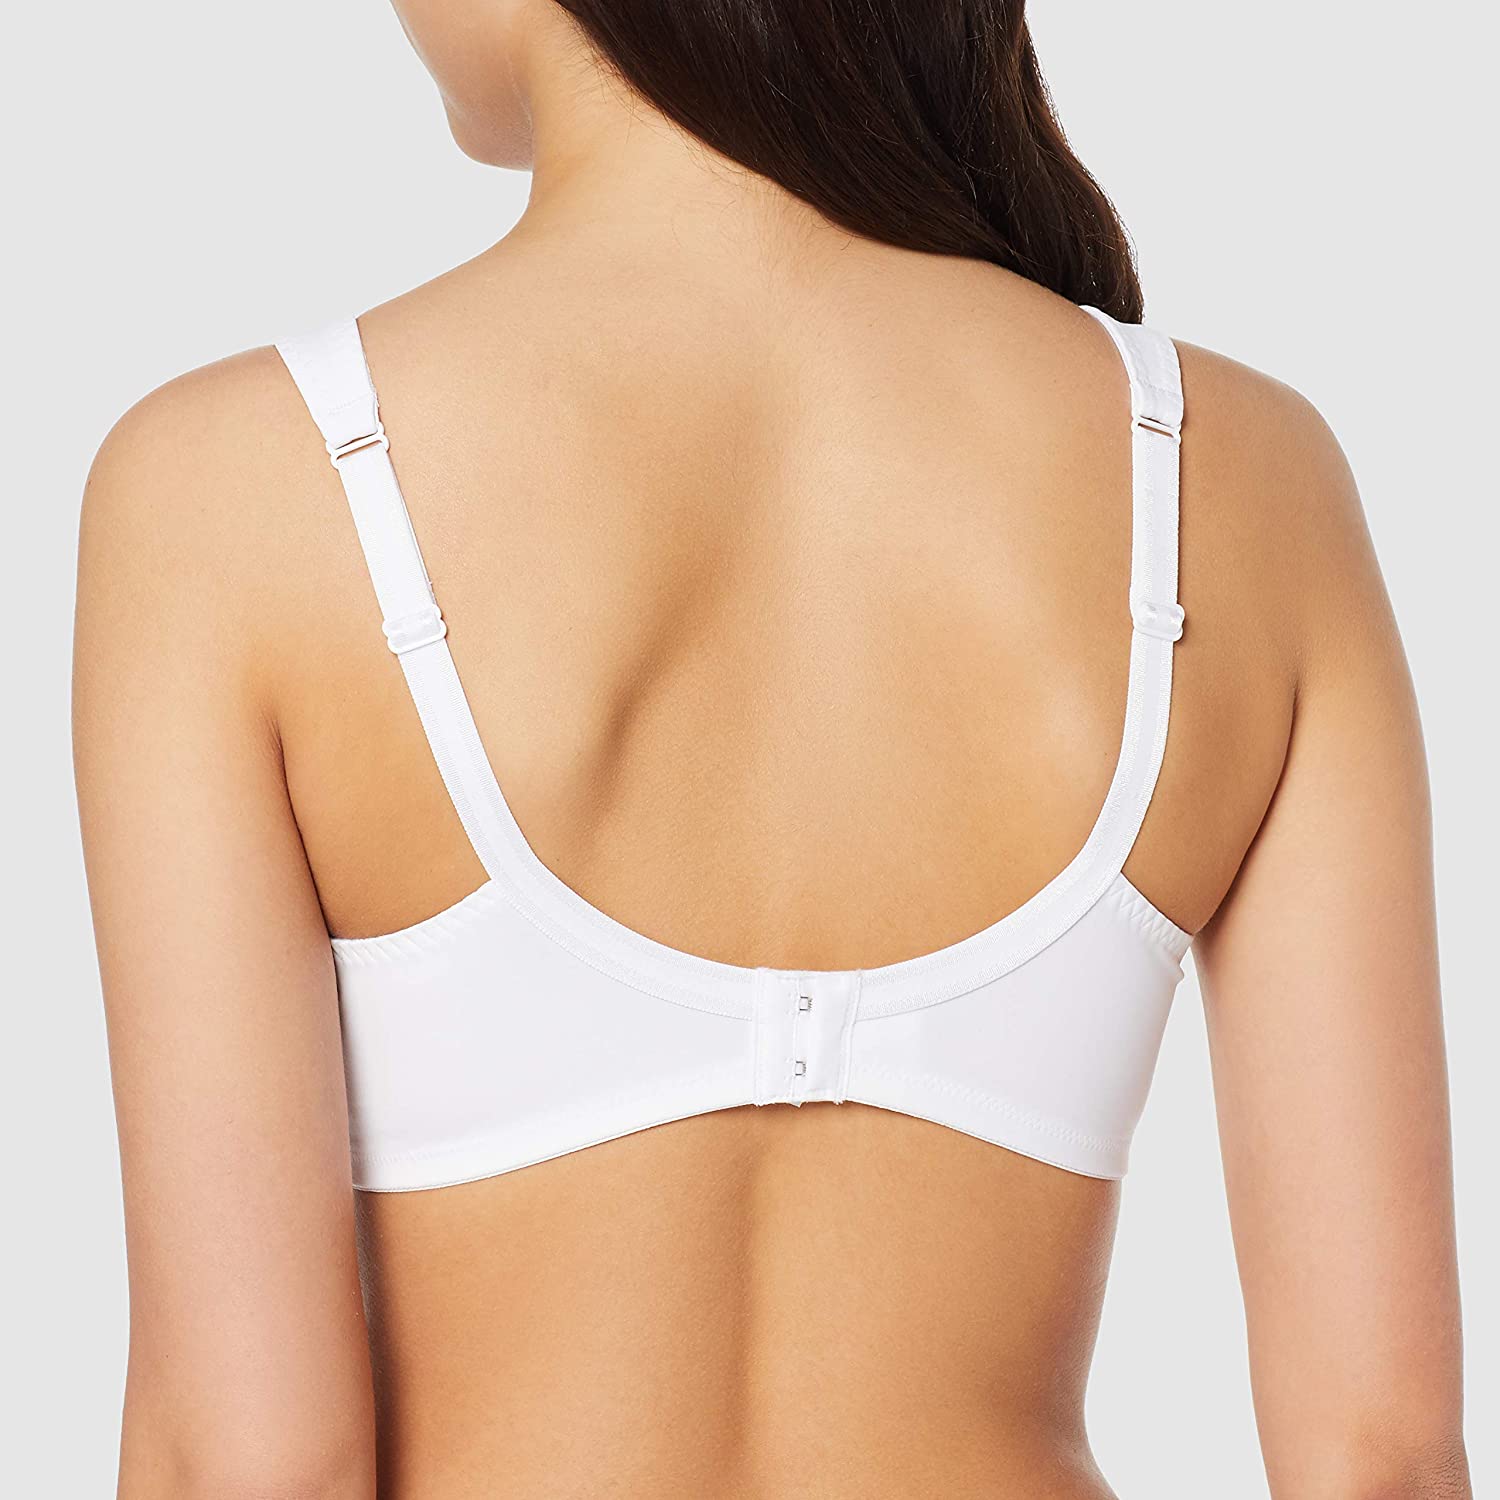 Smooth Cup Nursing and Maternity Bras